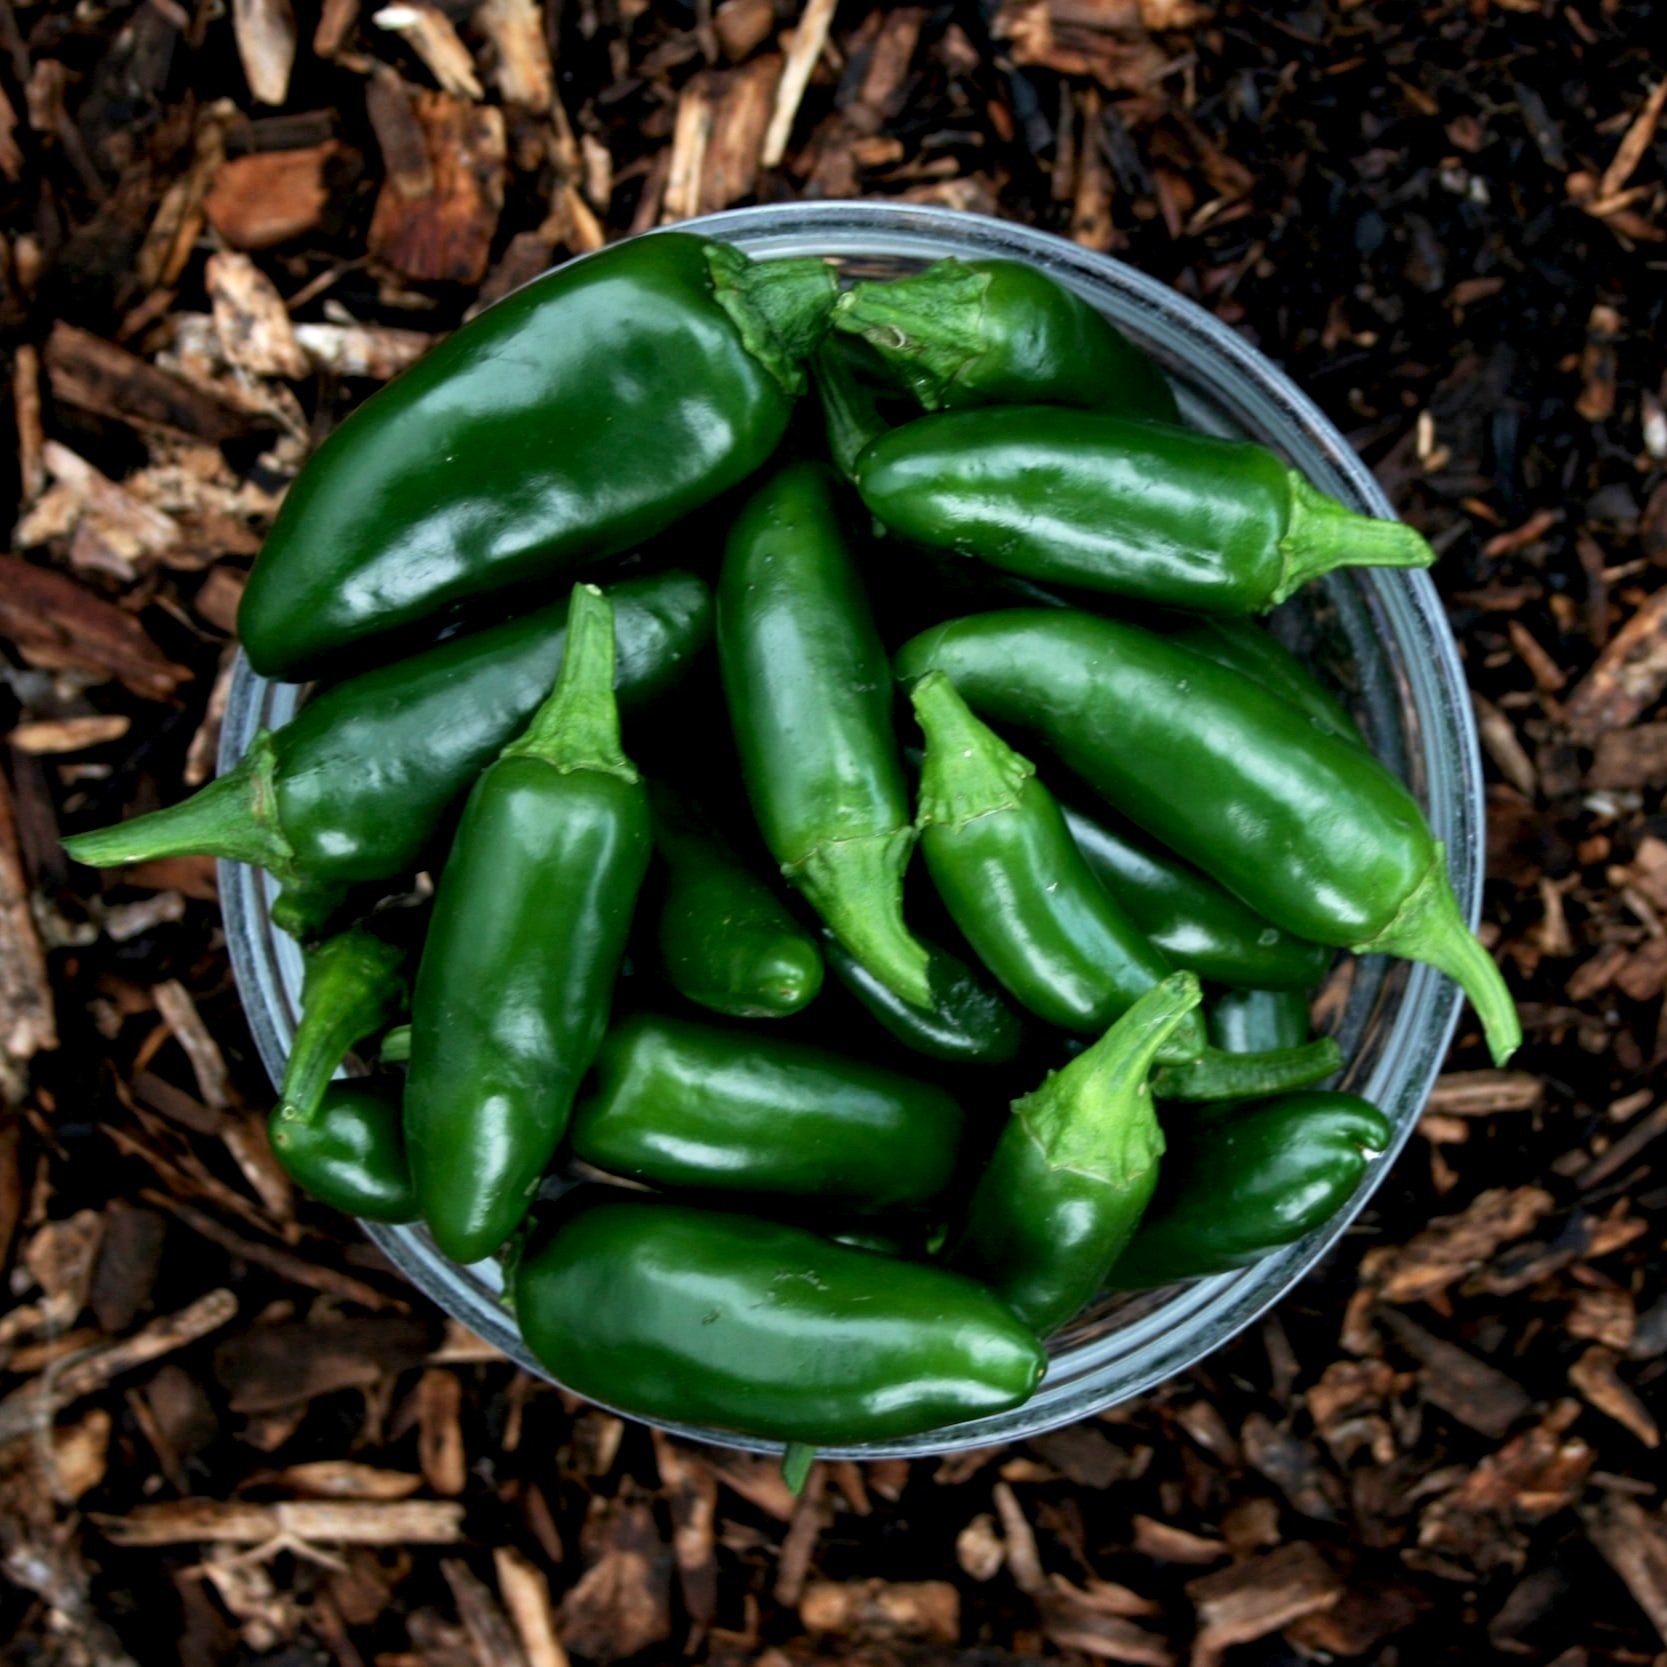 Scientists roast green chili peppers "in the sun": a recipe against climate change